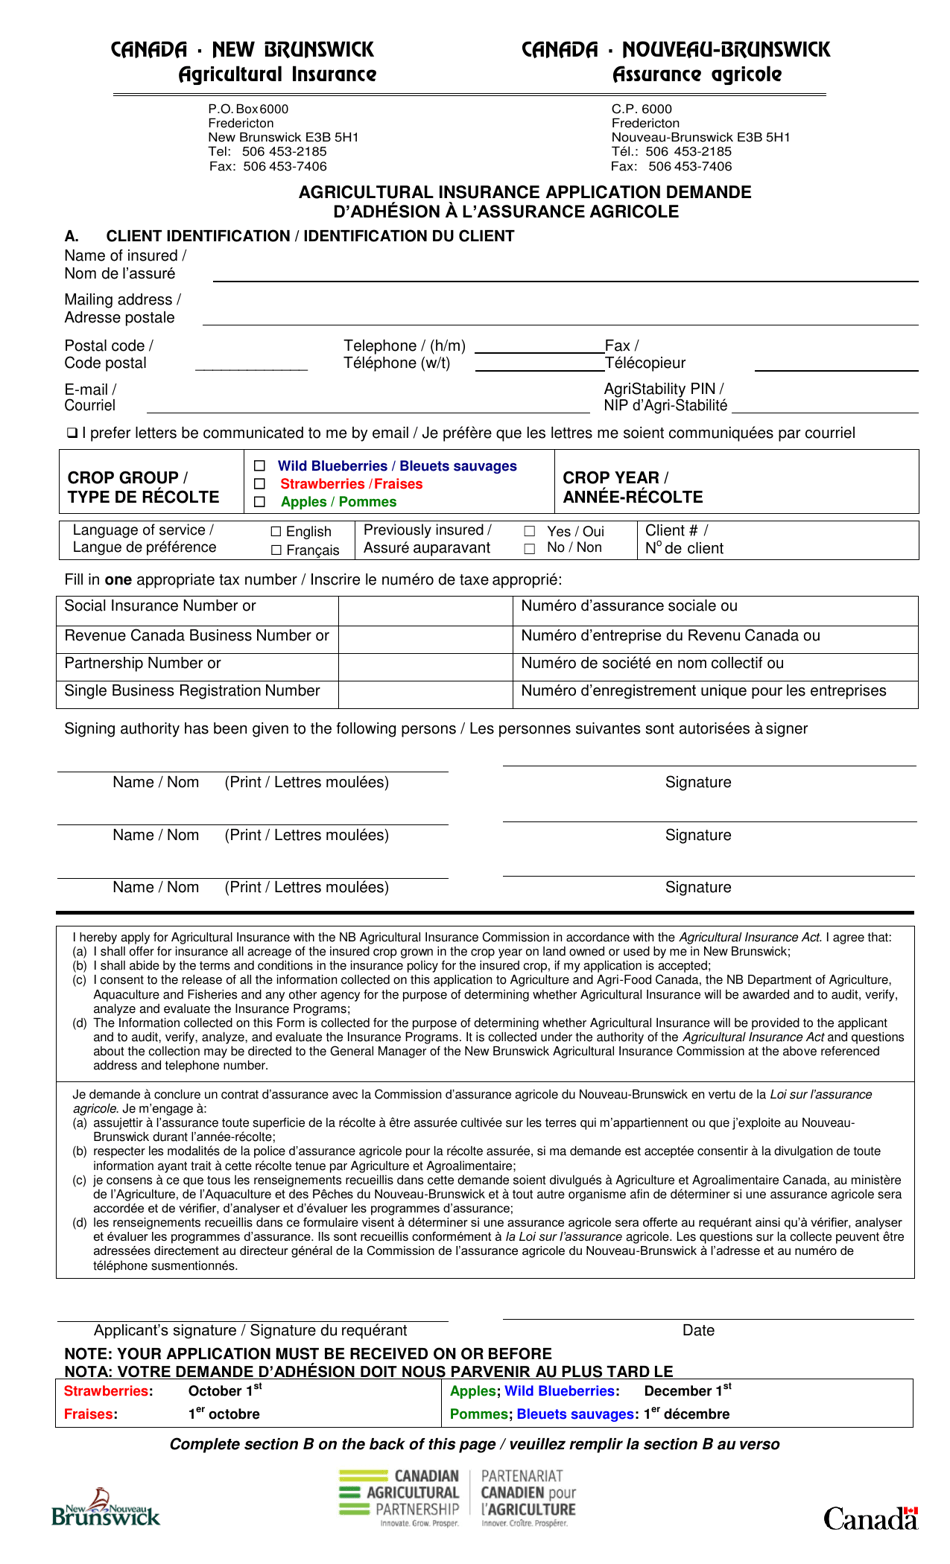 Agricultural Insurance Application - Wild Blueberries - New Brunswick, Canada (English / French), Page 1